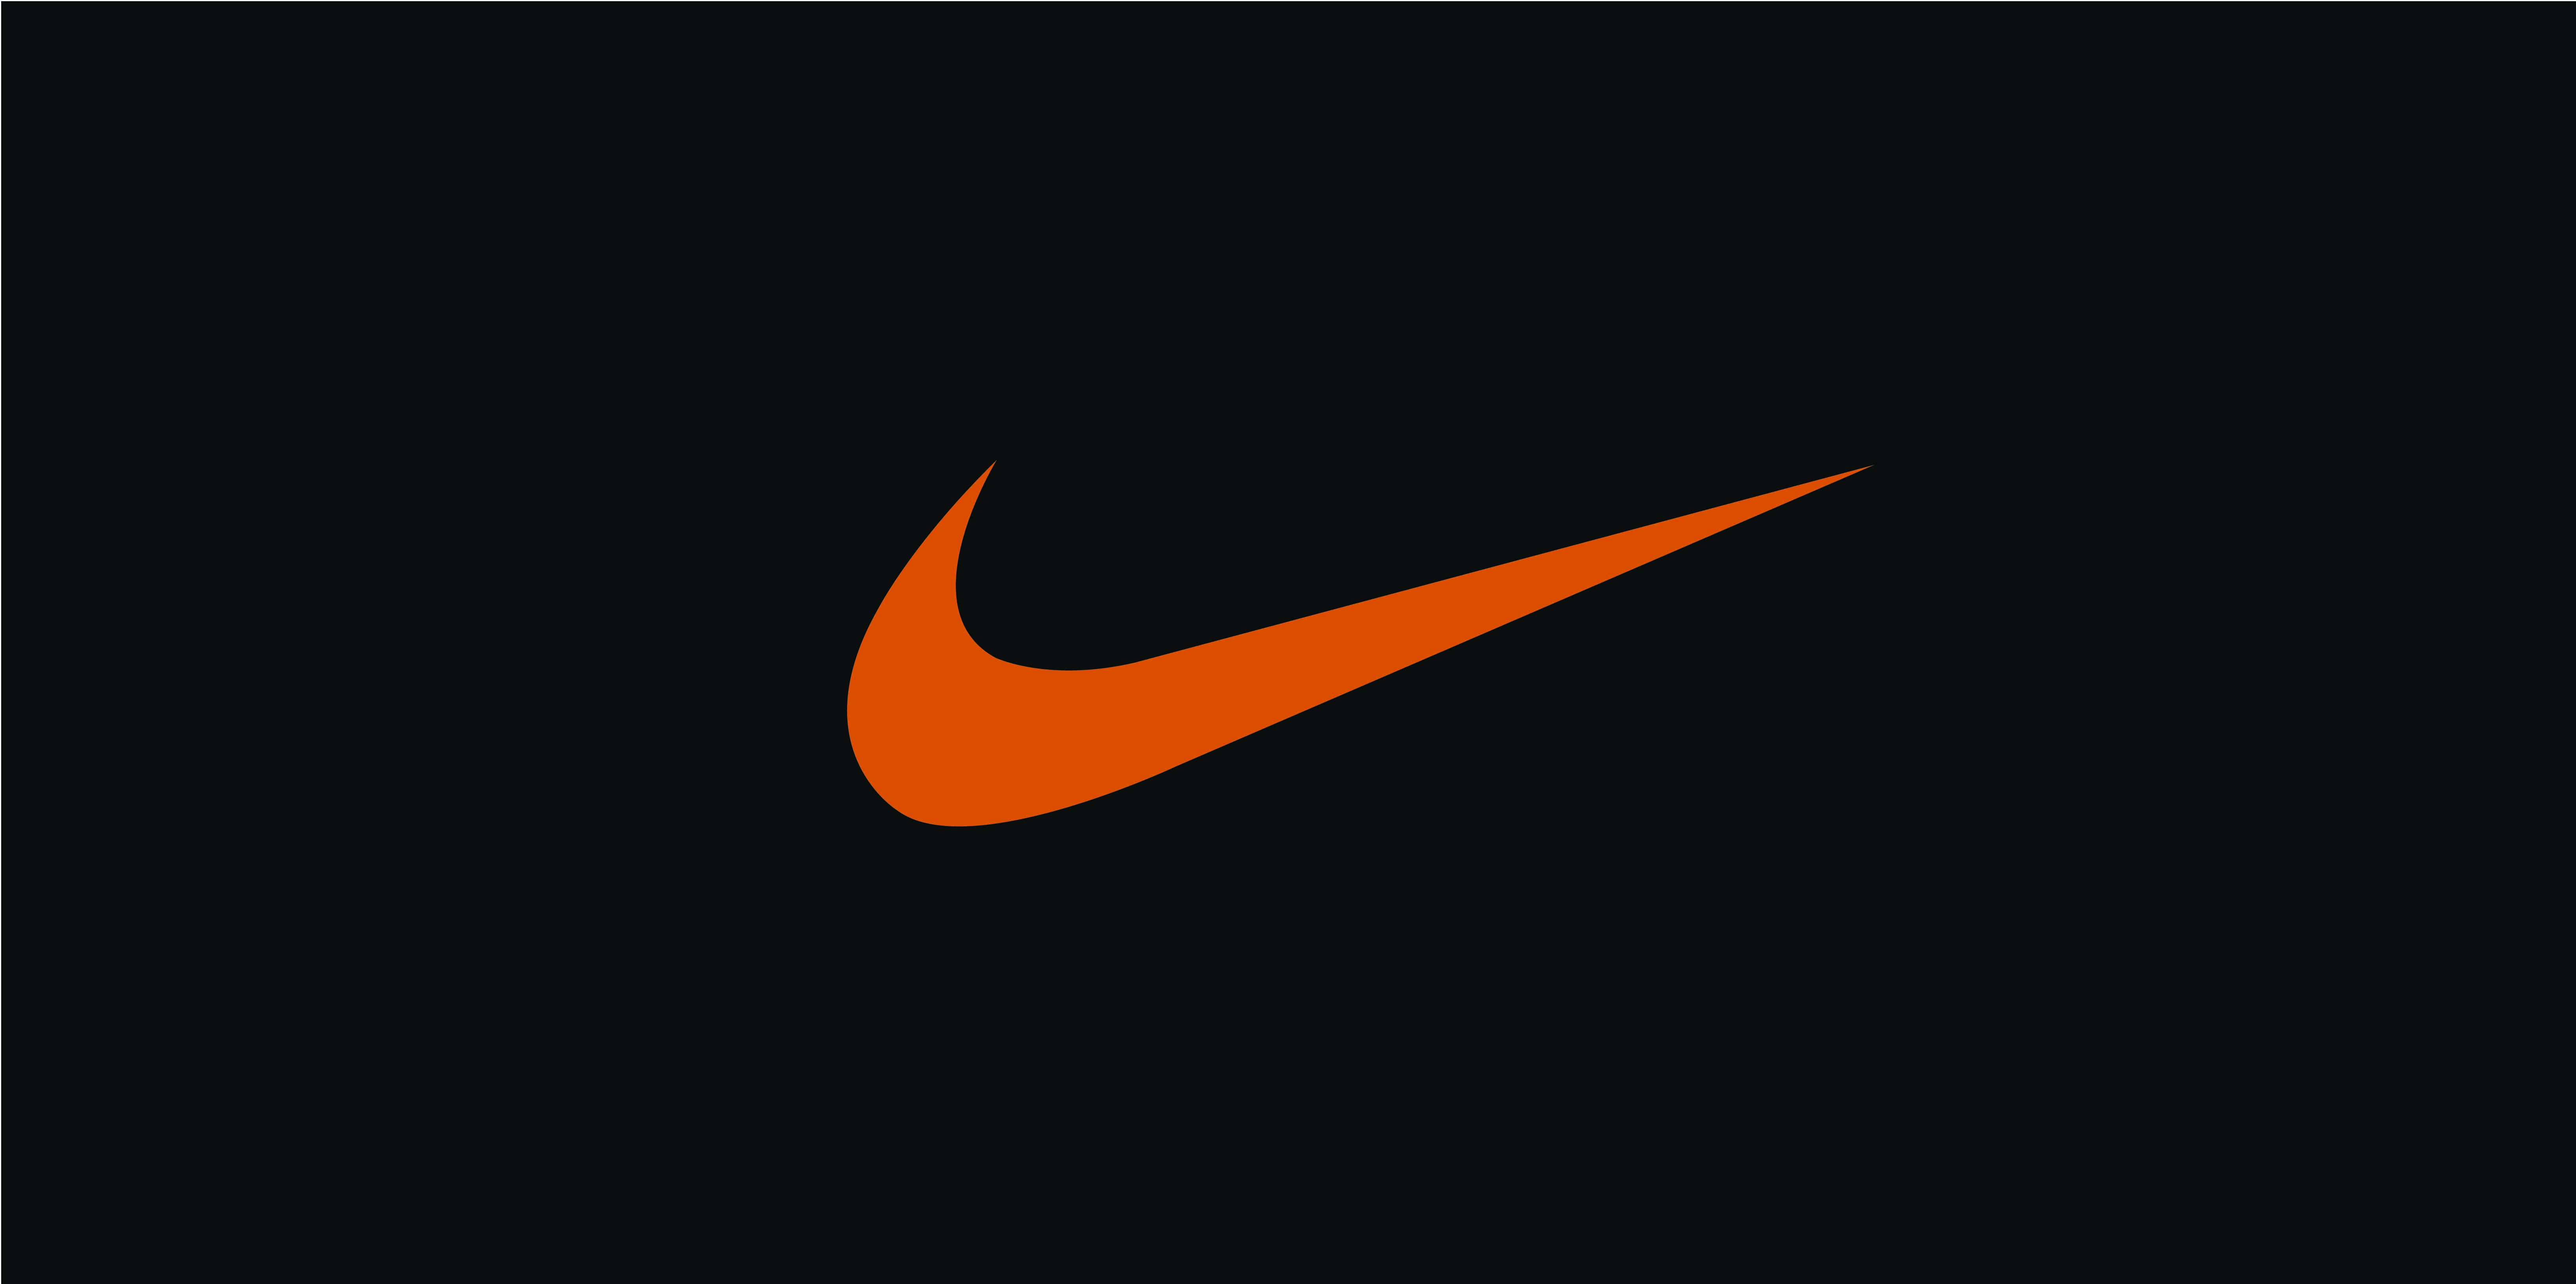 Nike Logo Wallpapers HD 2015 free download Wallpapers Backgrounds